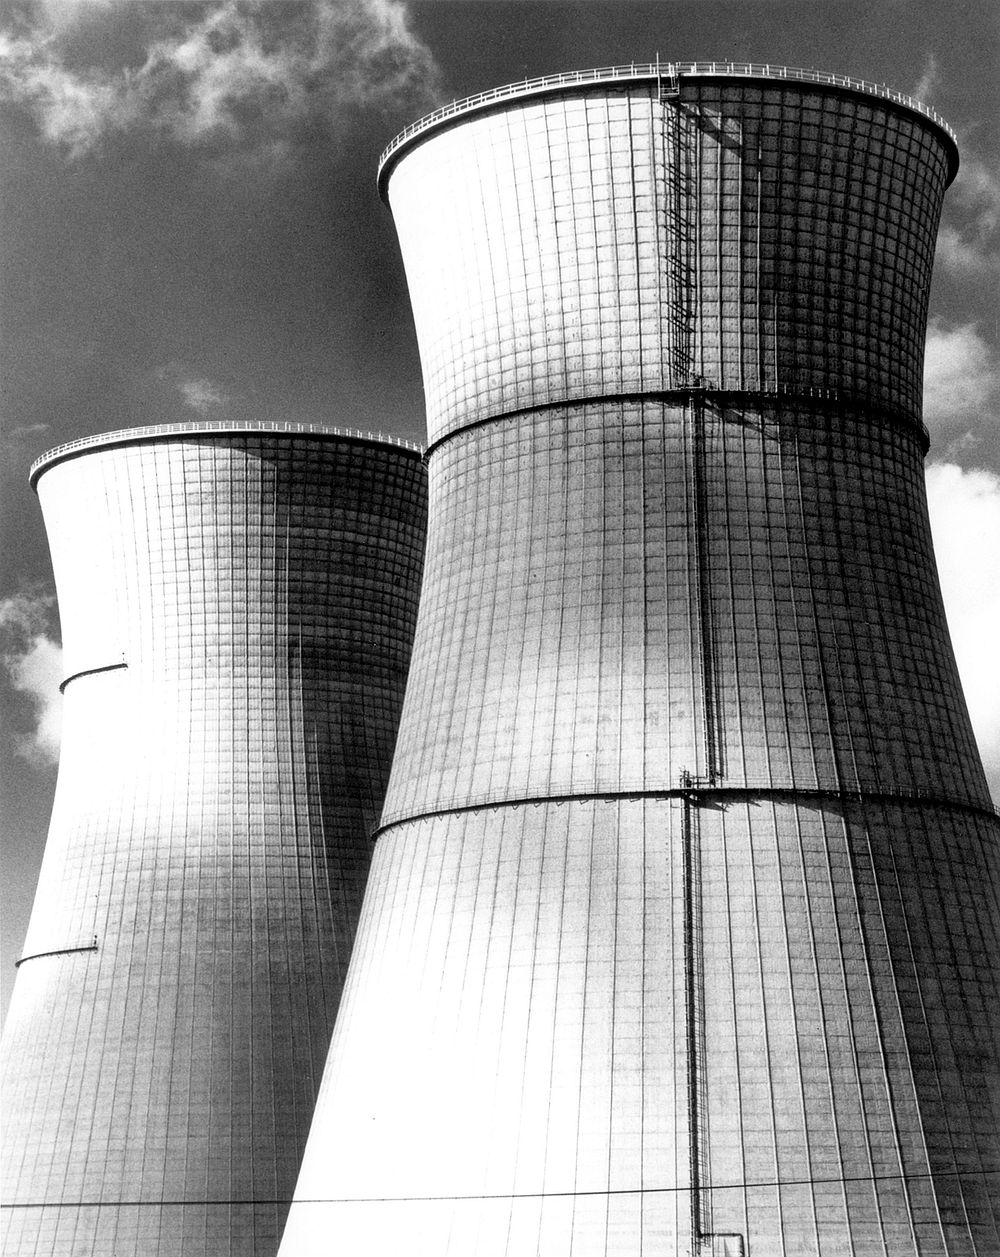 These two 43 story tall natural draft evaporation towers at Ranco Seco Nuclear Generating Station will dissipate waste heat…